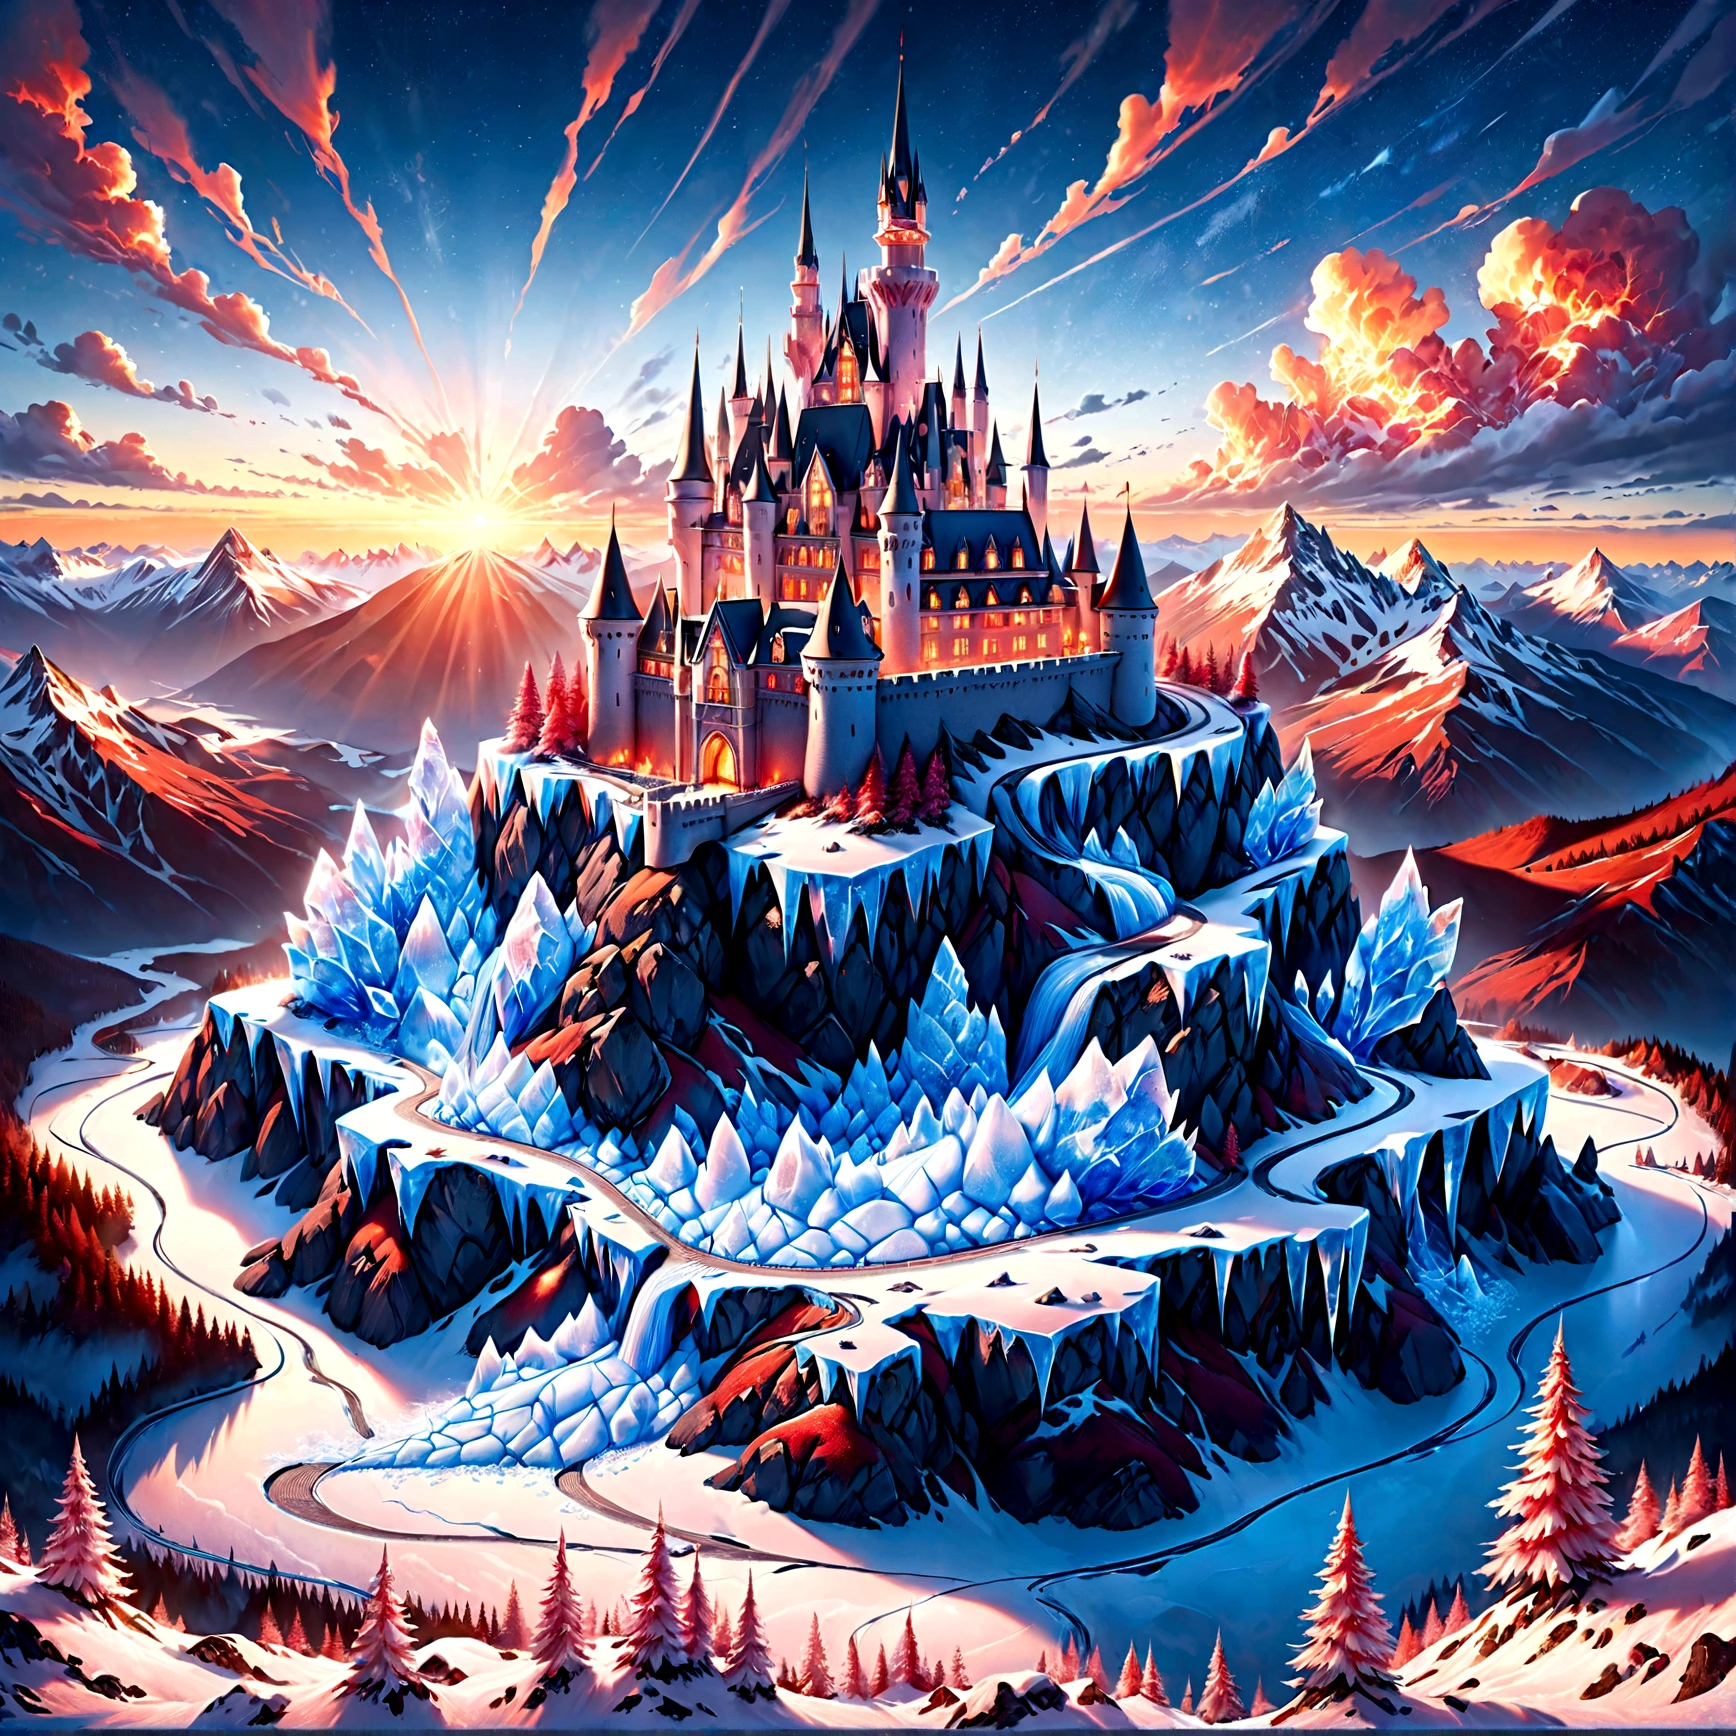 a panoramic award winning photography, Photorealistic, extremely detailed of a castle made from (ice: 1.3) made_of_ice standing on the peak of a snowy mountain, an impressive best detailed castle made from ice (Photorealistic, extremely detailed), with towers, bridges, a moat filled with lava (Photorealistic, extremely detailed),  standing on top of a snowy mountain (masterpiece, extremely detailed, best quality), with pine trees, sunset light, some clouds in the air,  alpine mountain range background, best realistic, best details, best quality, 16k, [ultra detailed], masterpiece, best quality, (extremely detailed), ultra wide shot, photorealism, depth of field, faize, raging nebula